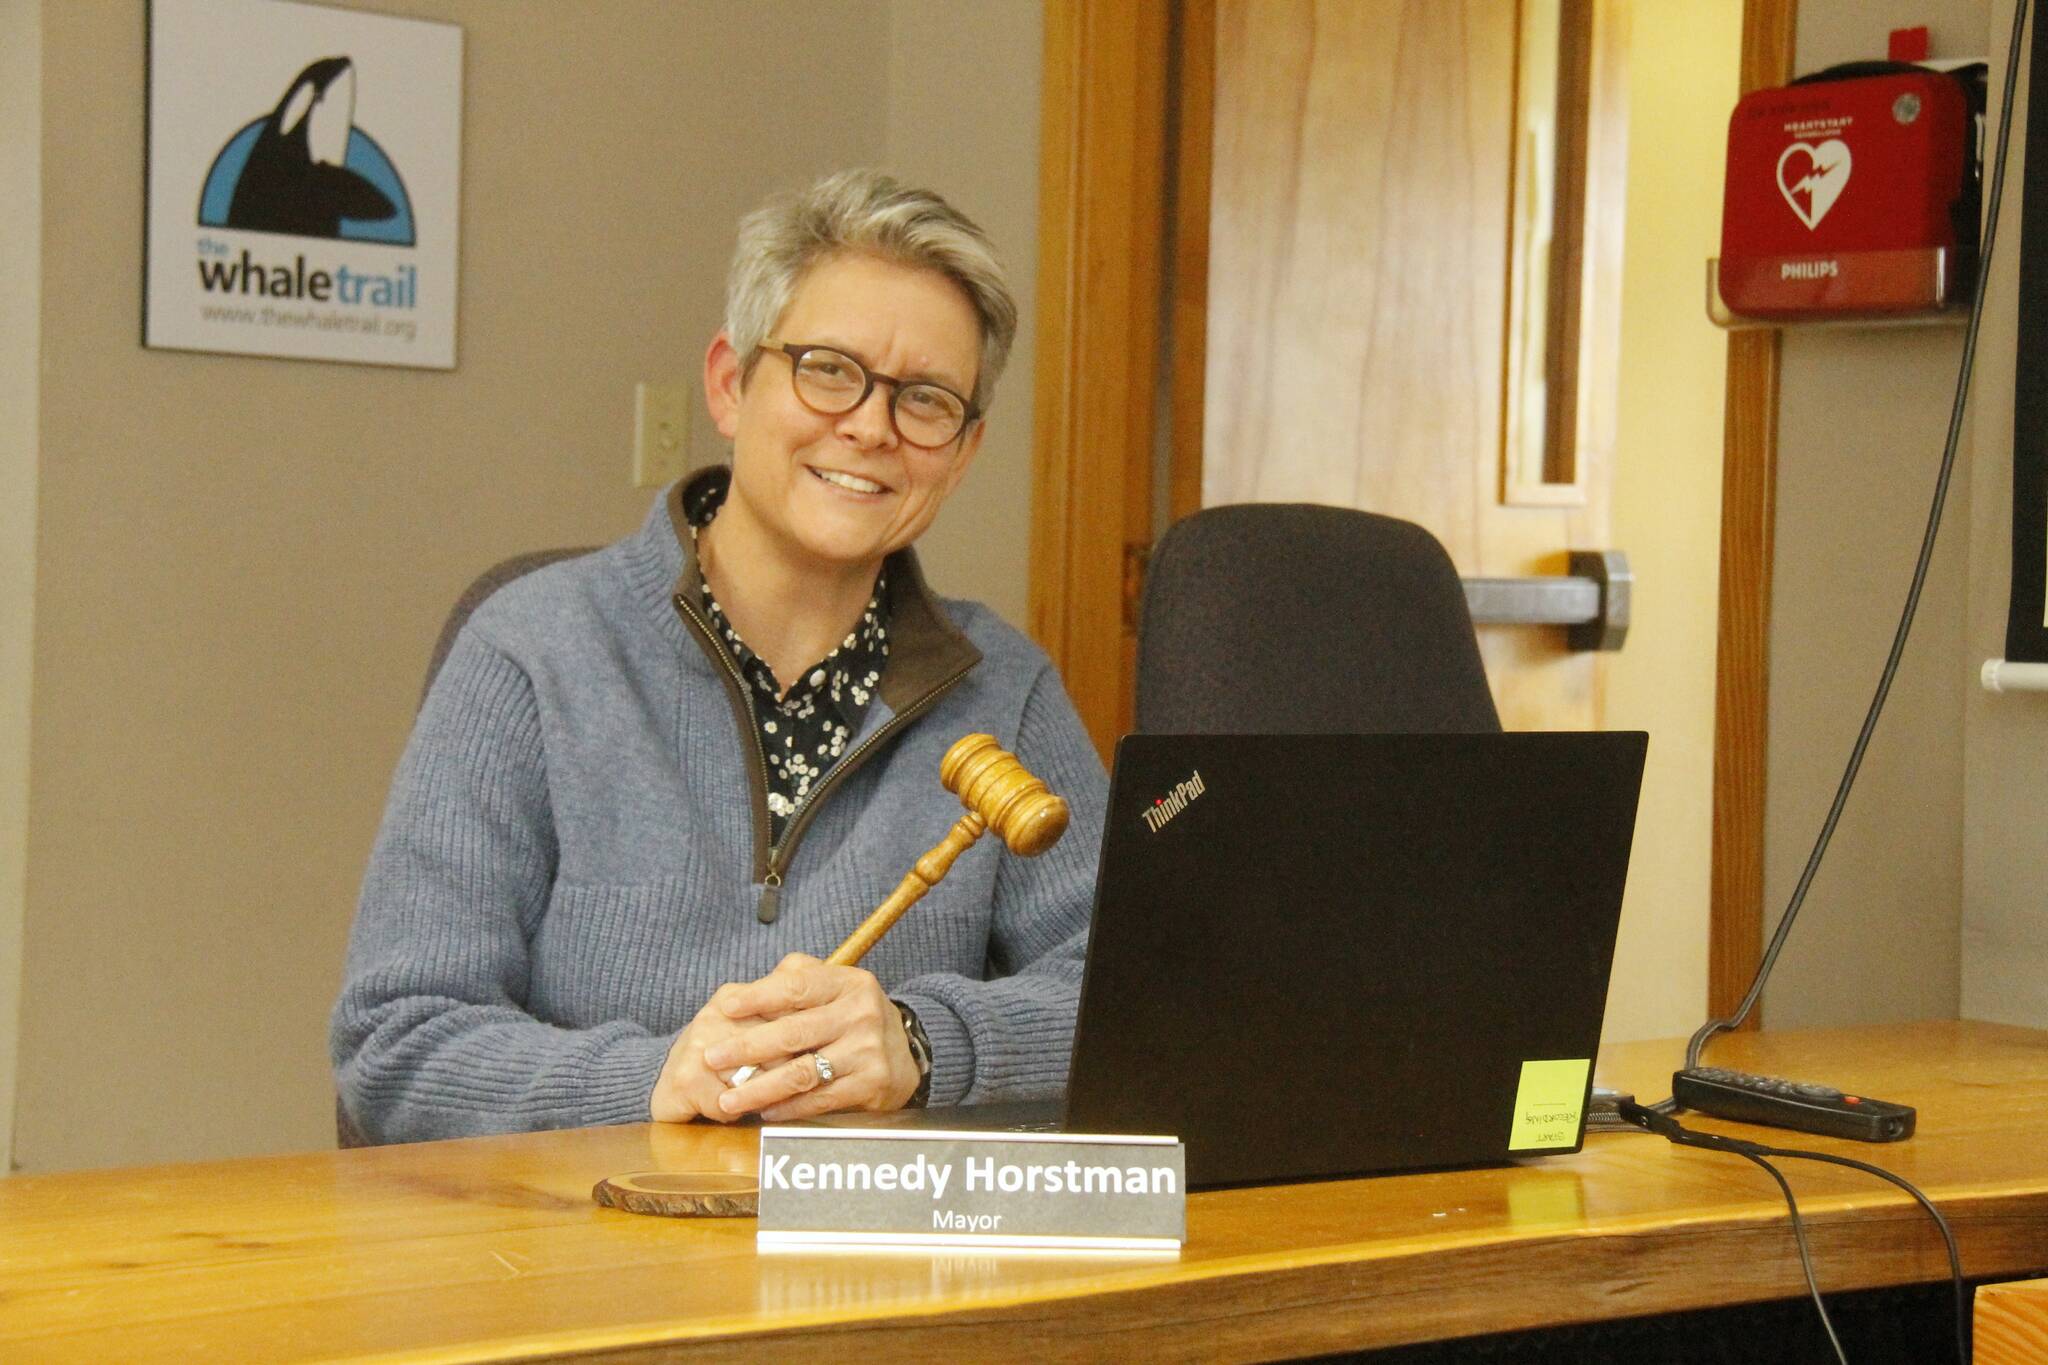 Mayor Kennedy Horstman tests out her gavel in empty city council chambers while setting up a Zoom meeting for a citizen-led committee on Wednesday. (Photo by Kira Erickson/South Whidbey Record)